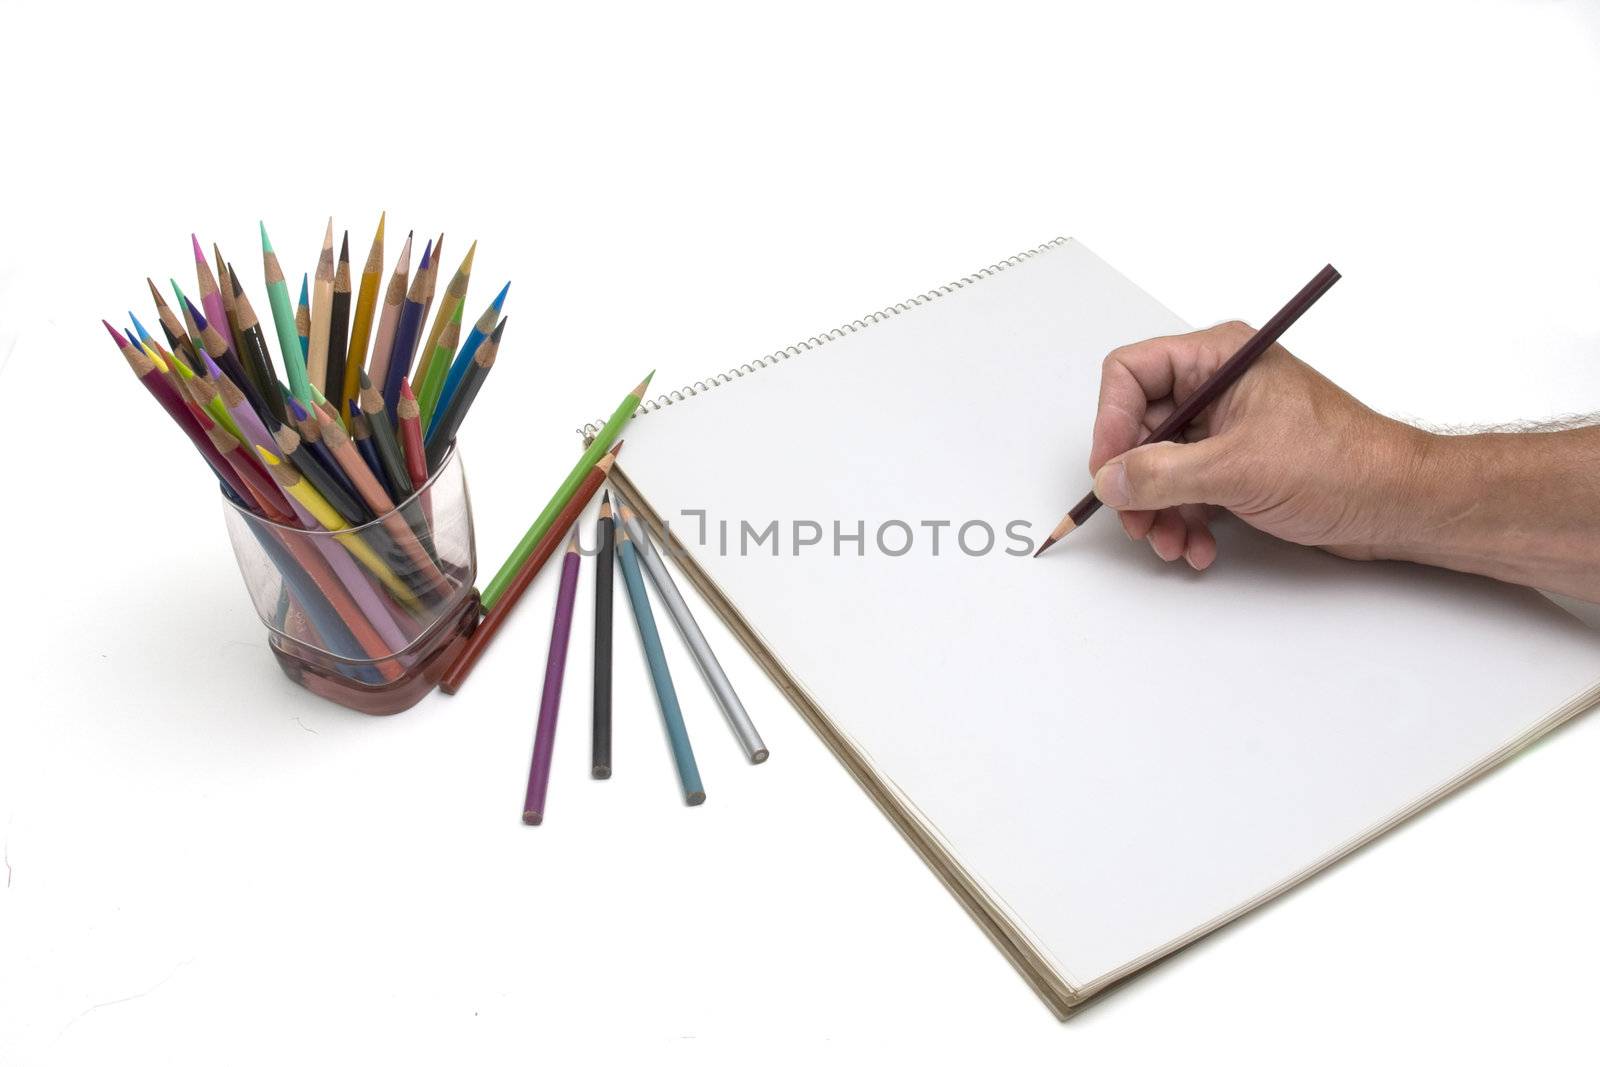 Artist starting a drawing using colored pencils.